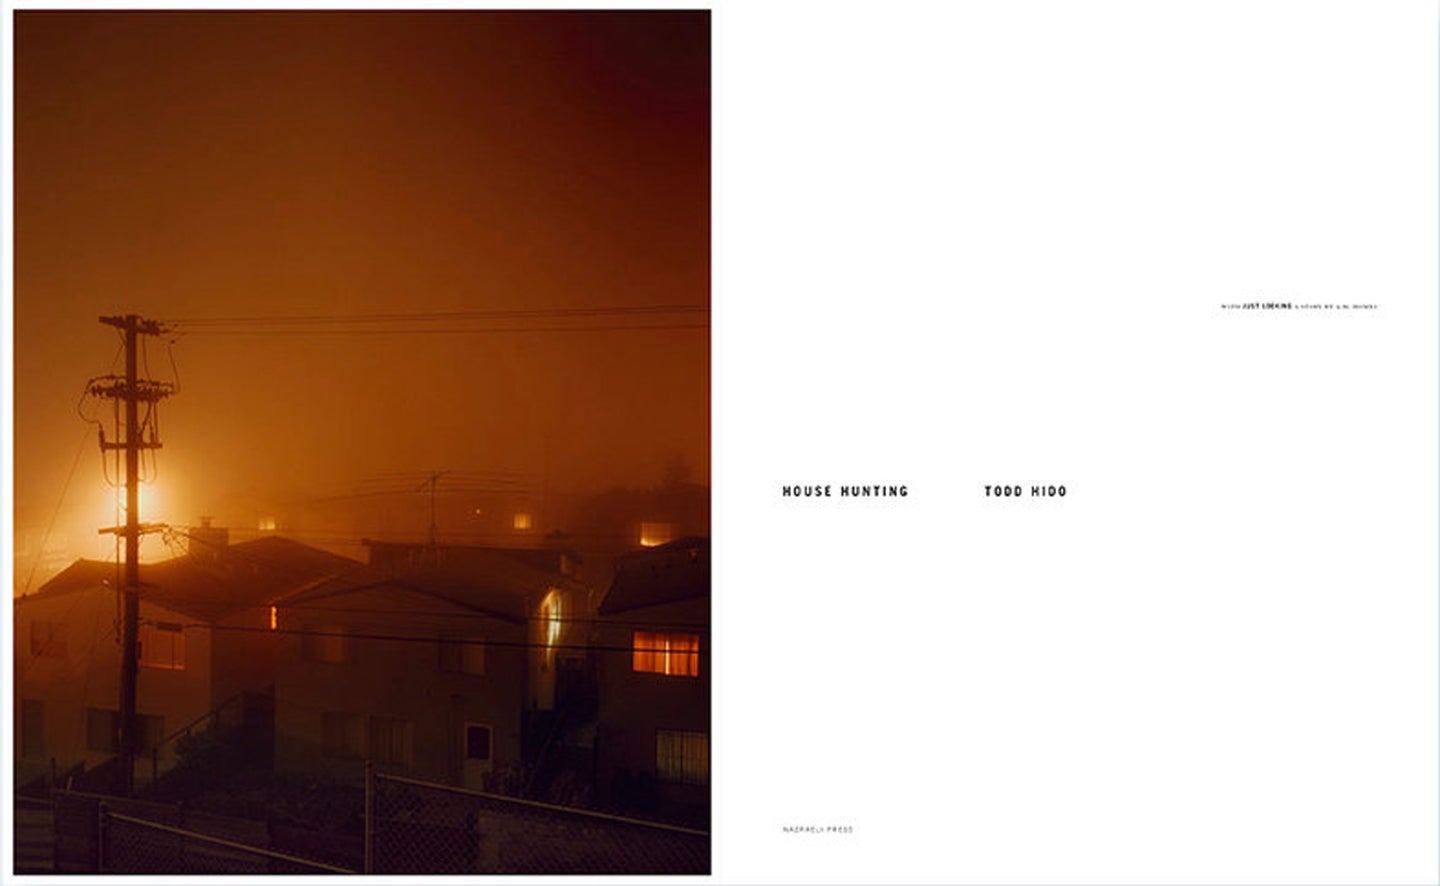 Todd Hido: House Hunting (Remastered Third Edition) [SIGNED]